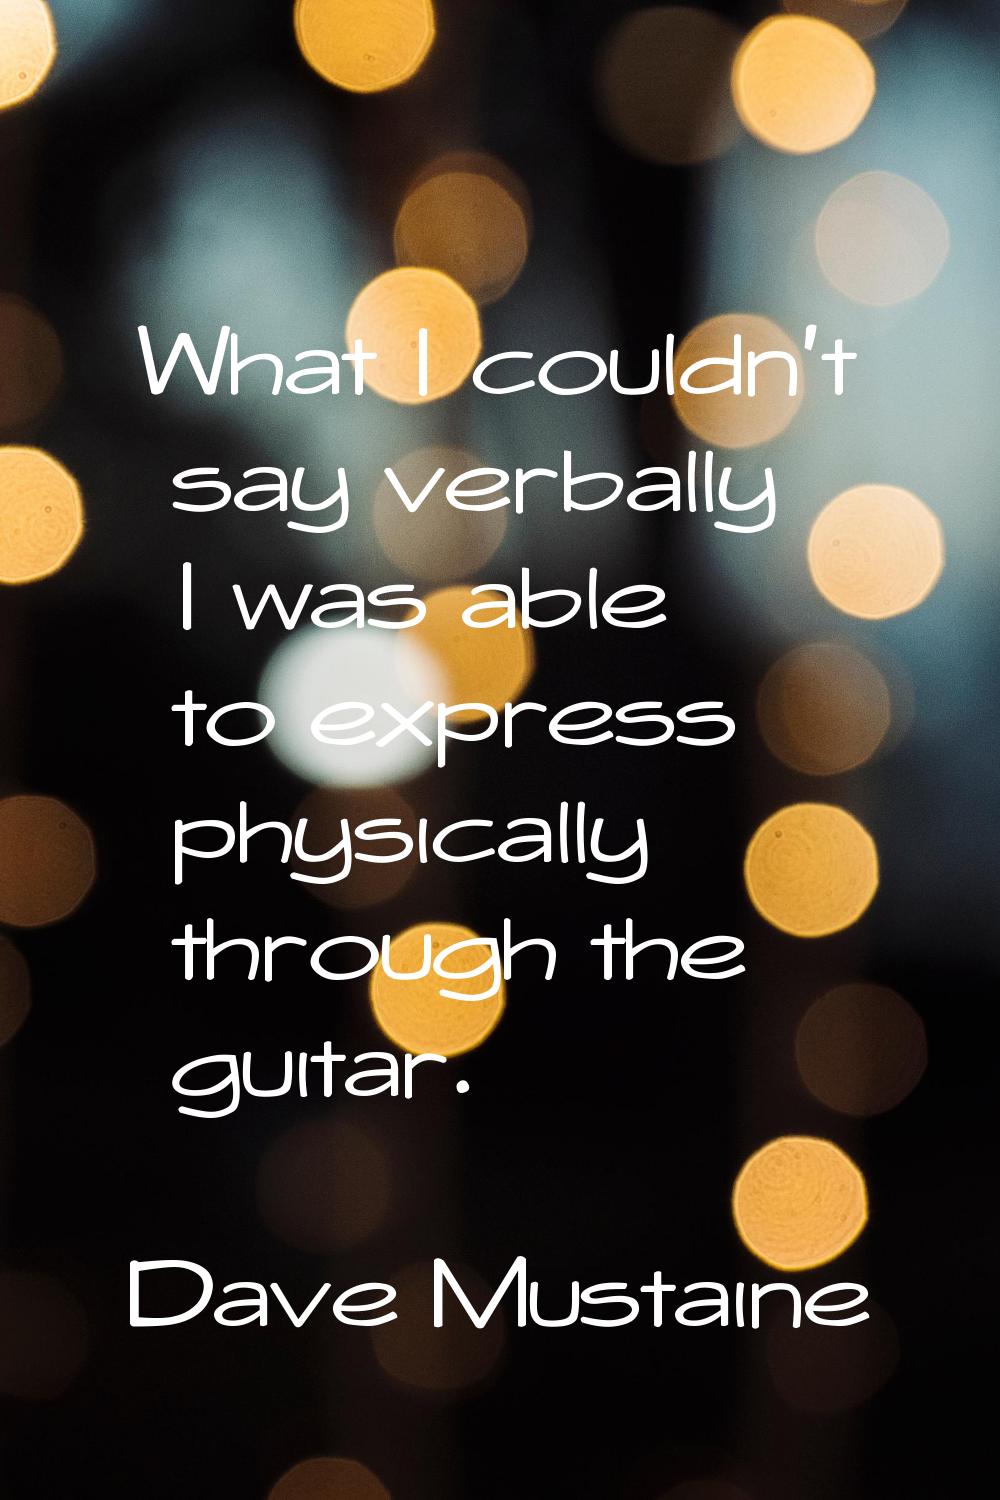 What I couldn't say verbally I was able to express physically through the guitar.